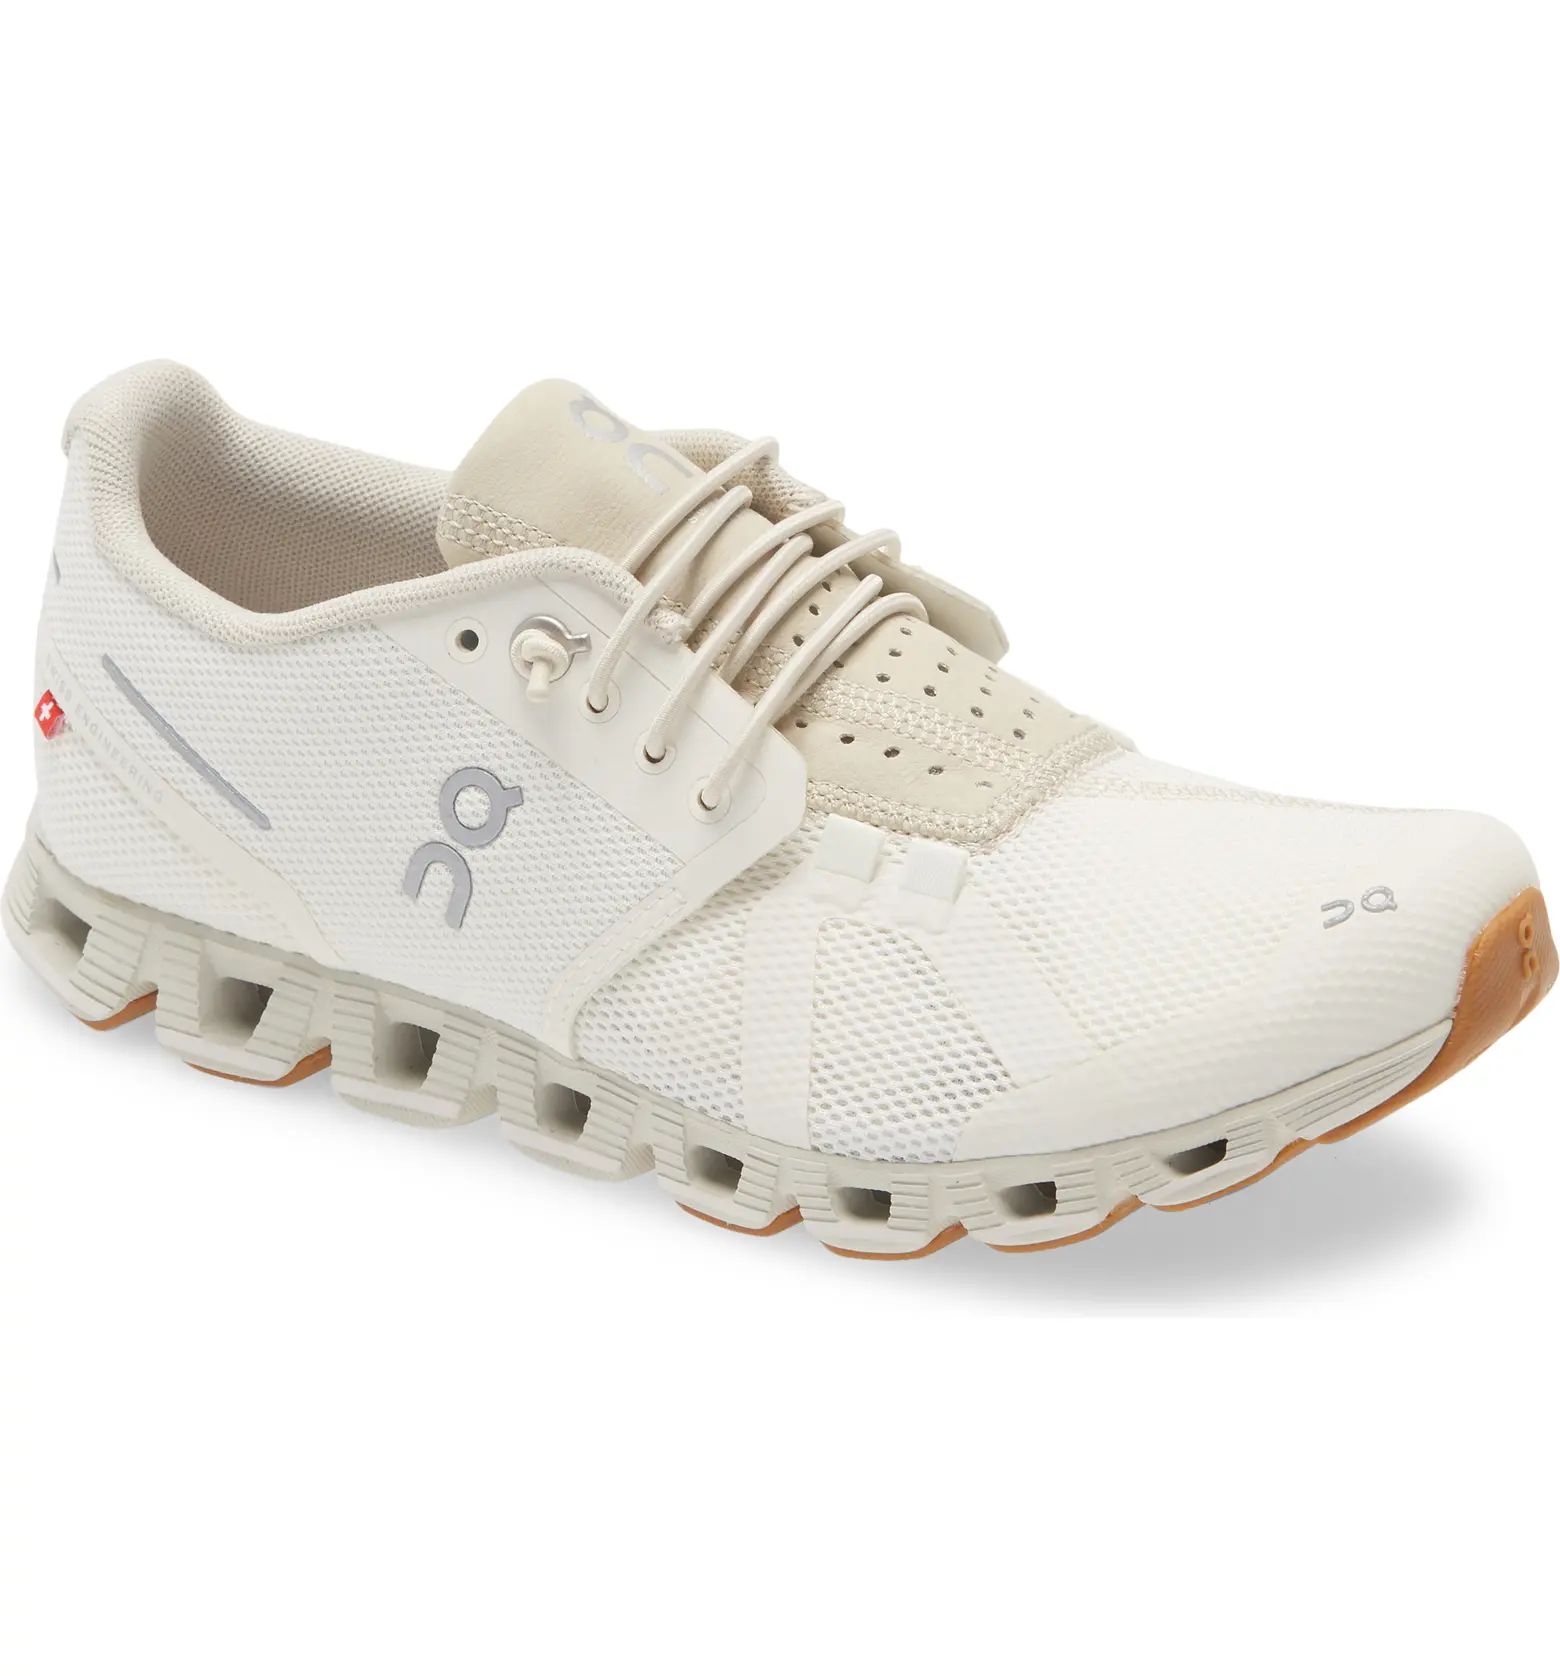 Shoes Cloud Running Shoe | Nordstrom